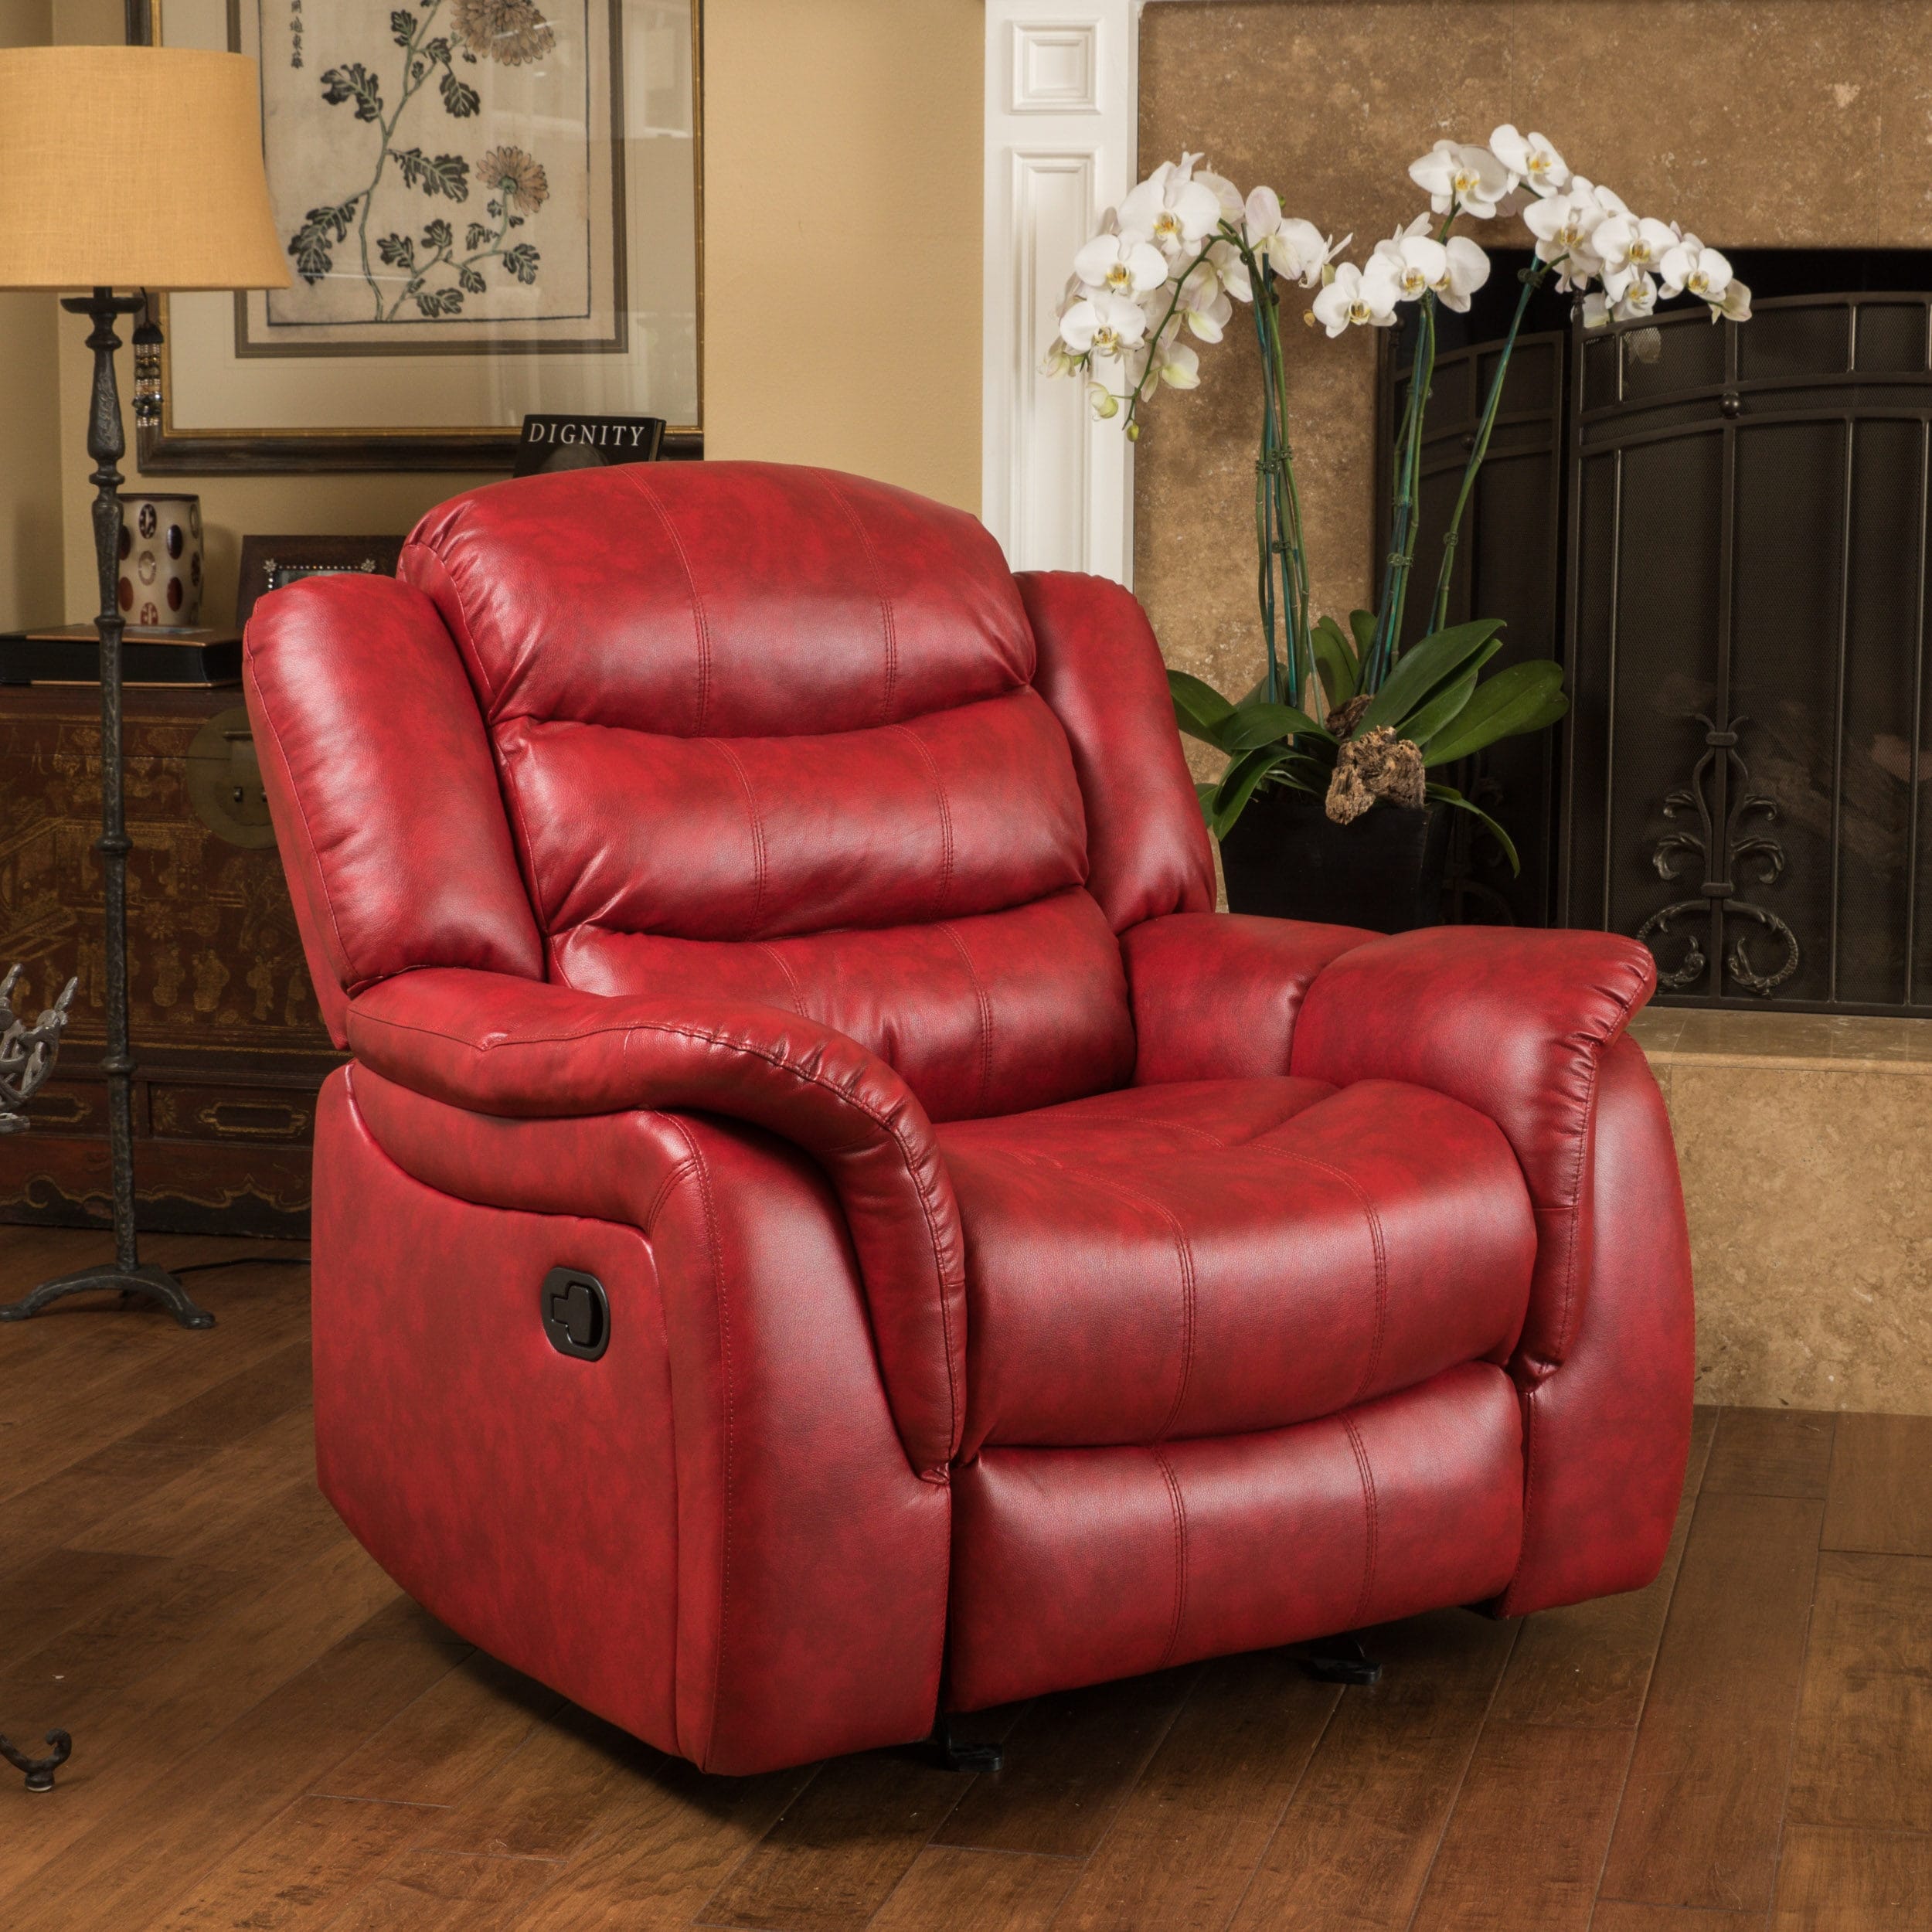 Hawthorne Pu Leather Glider Recliner Chair By Christopher Knight Home